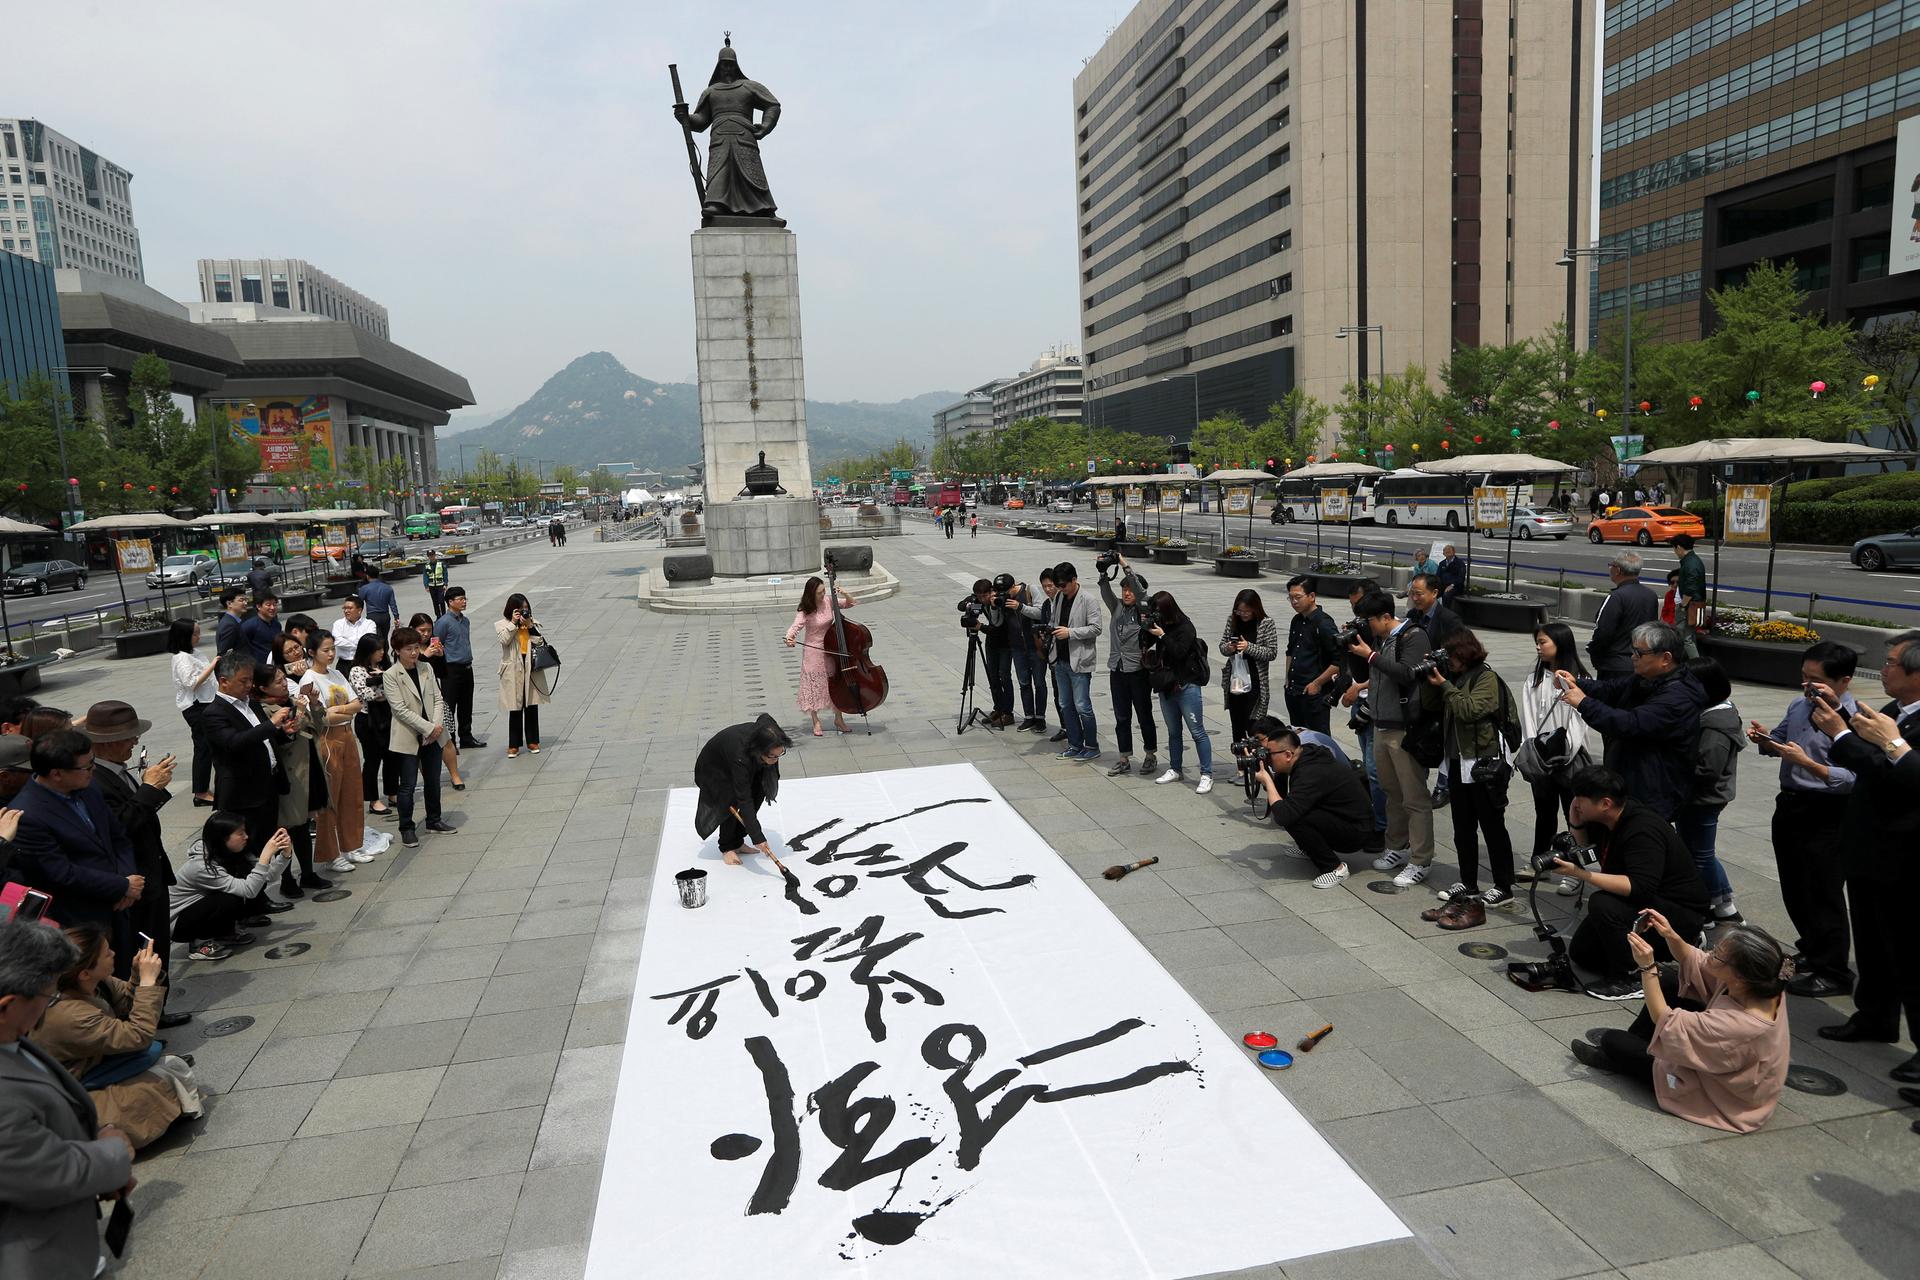 a pro-unification rally ahead of the upcoming summit between North and South Korea